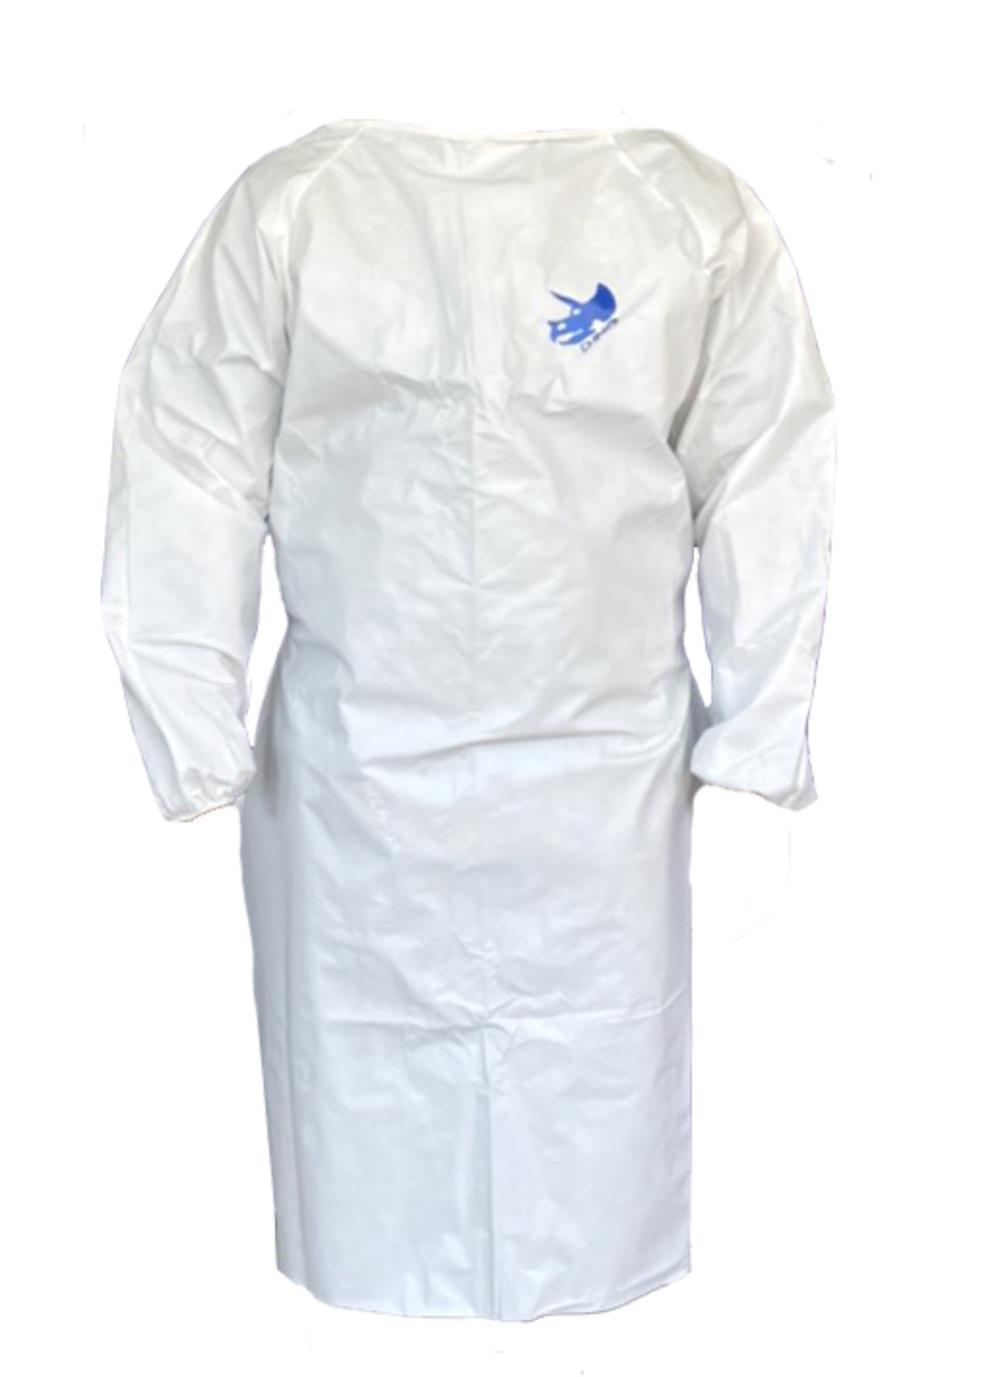  ISOLATION GOWN ทางการแพทย์,เสื้อกาวน์,DINO,Plant and Facility Equipment/Safety Equipment/Protective Clothing